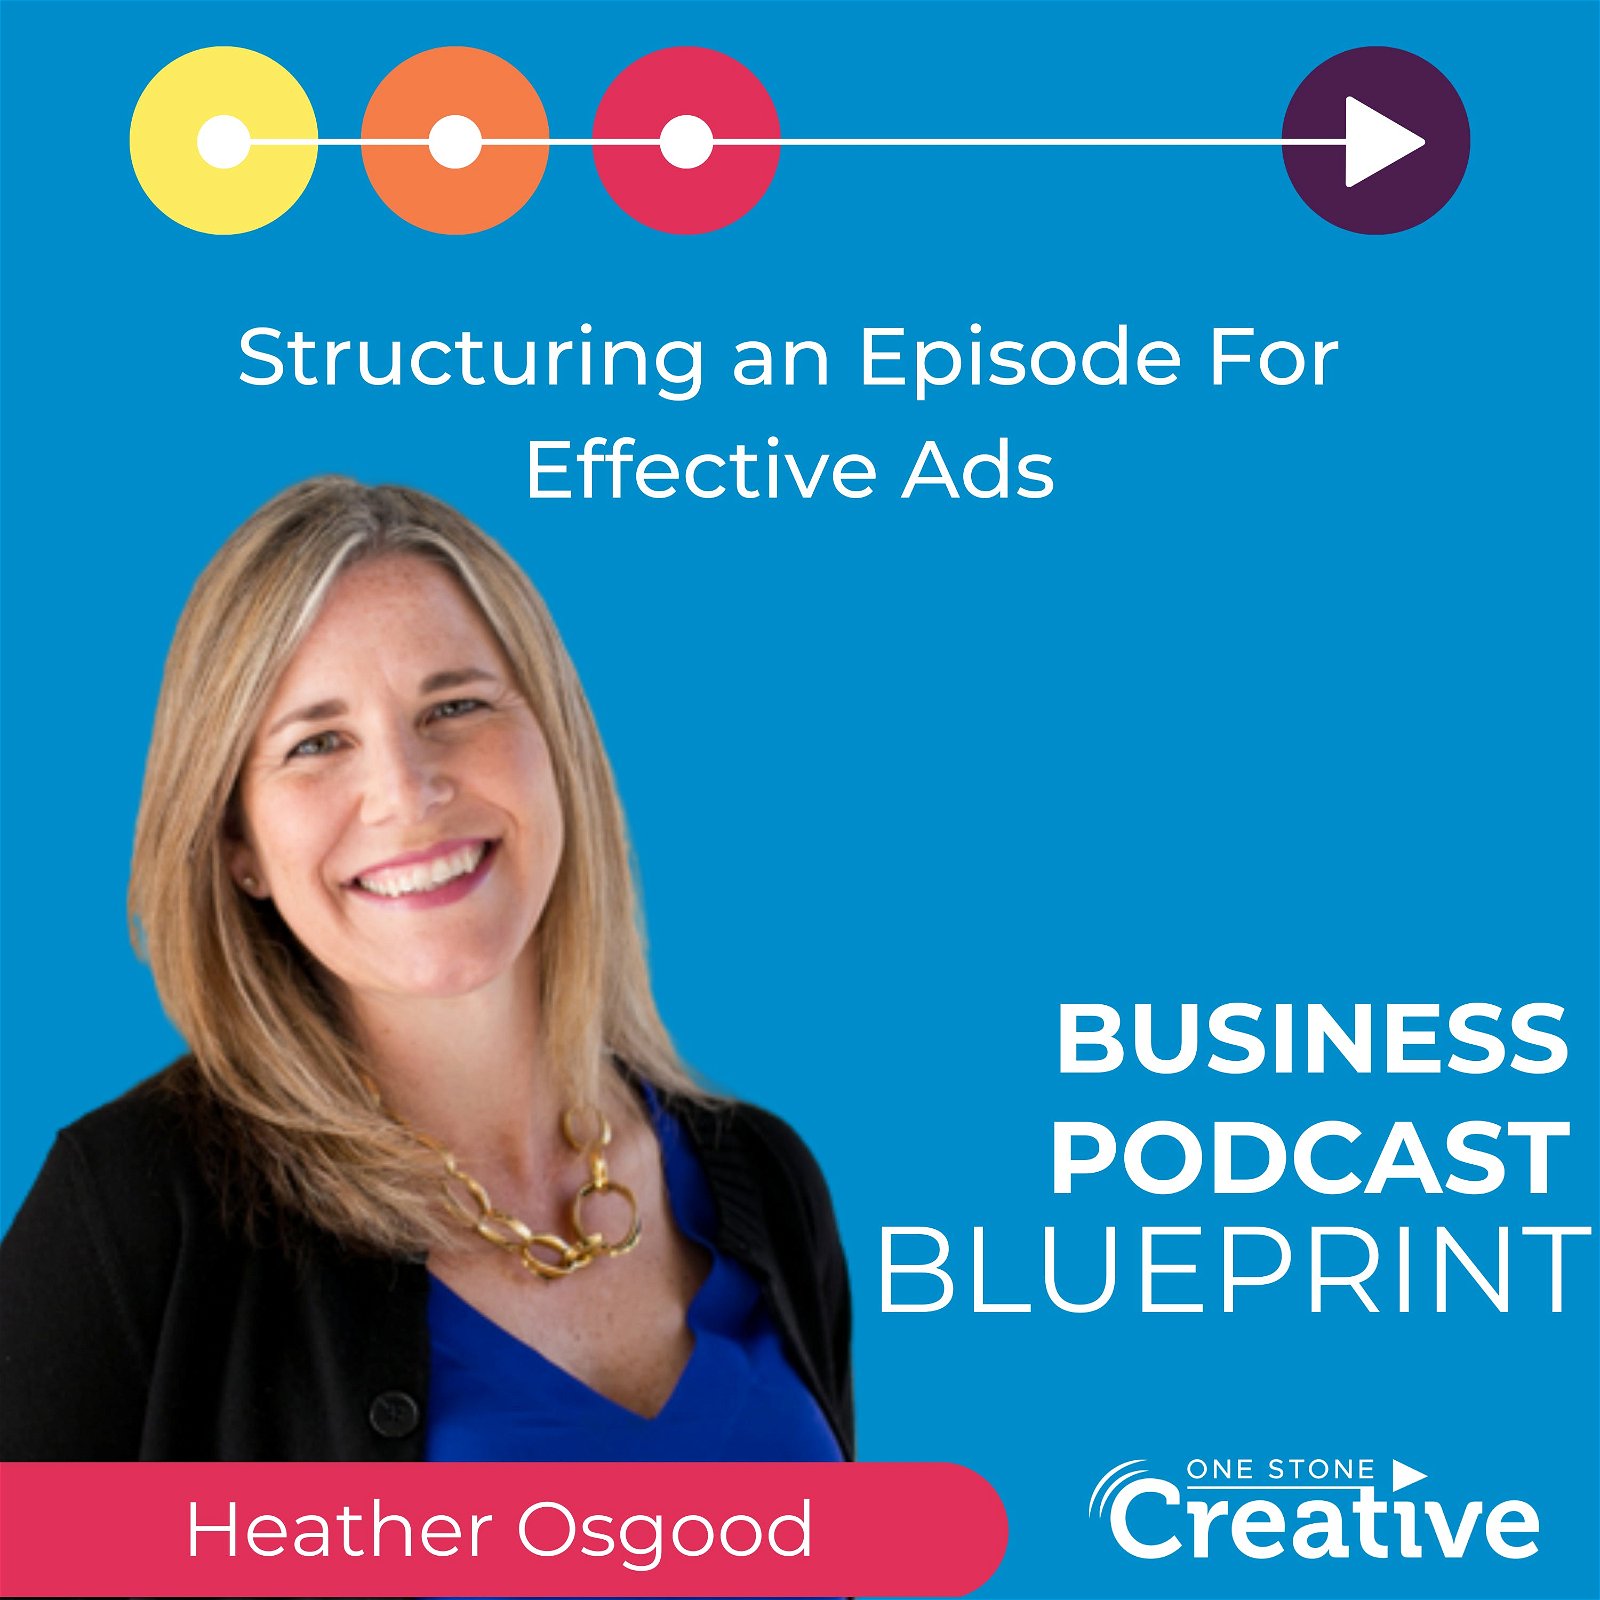 Structuring an Episode For Effective Ads with Heather Osgood